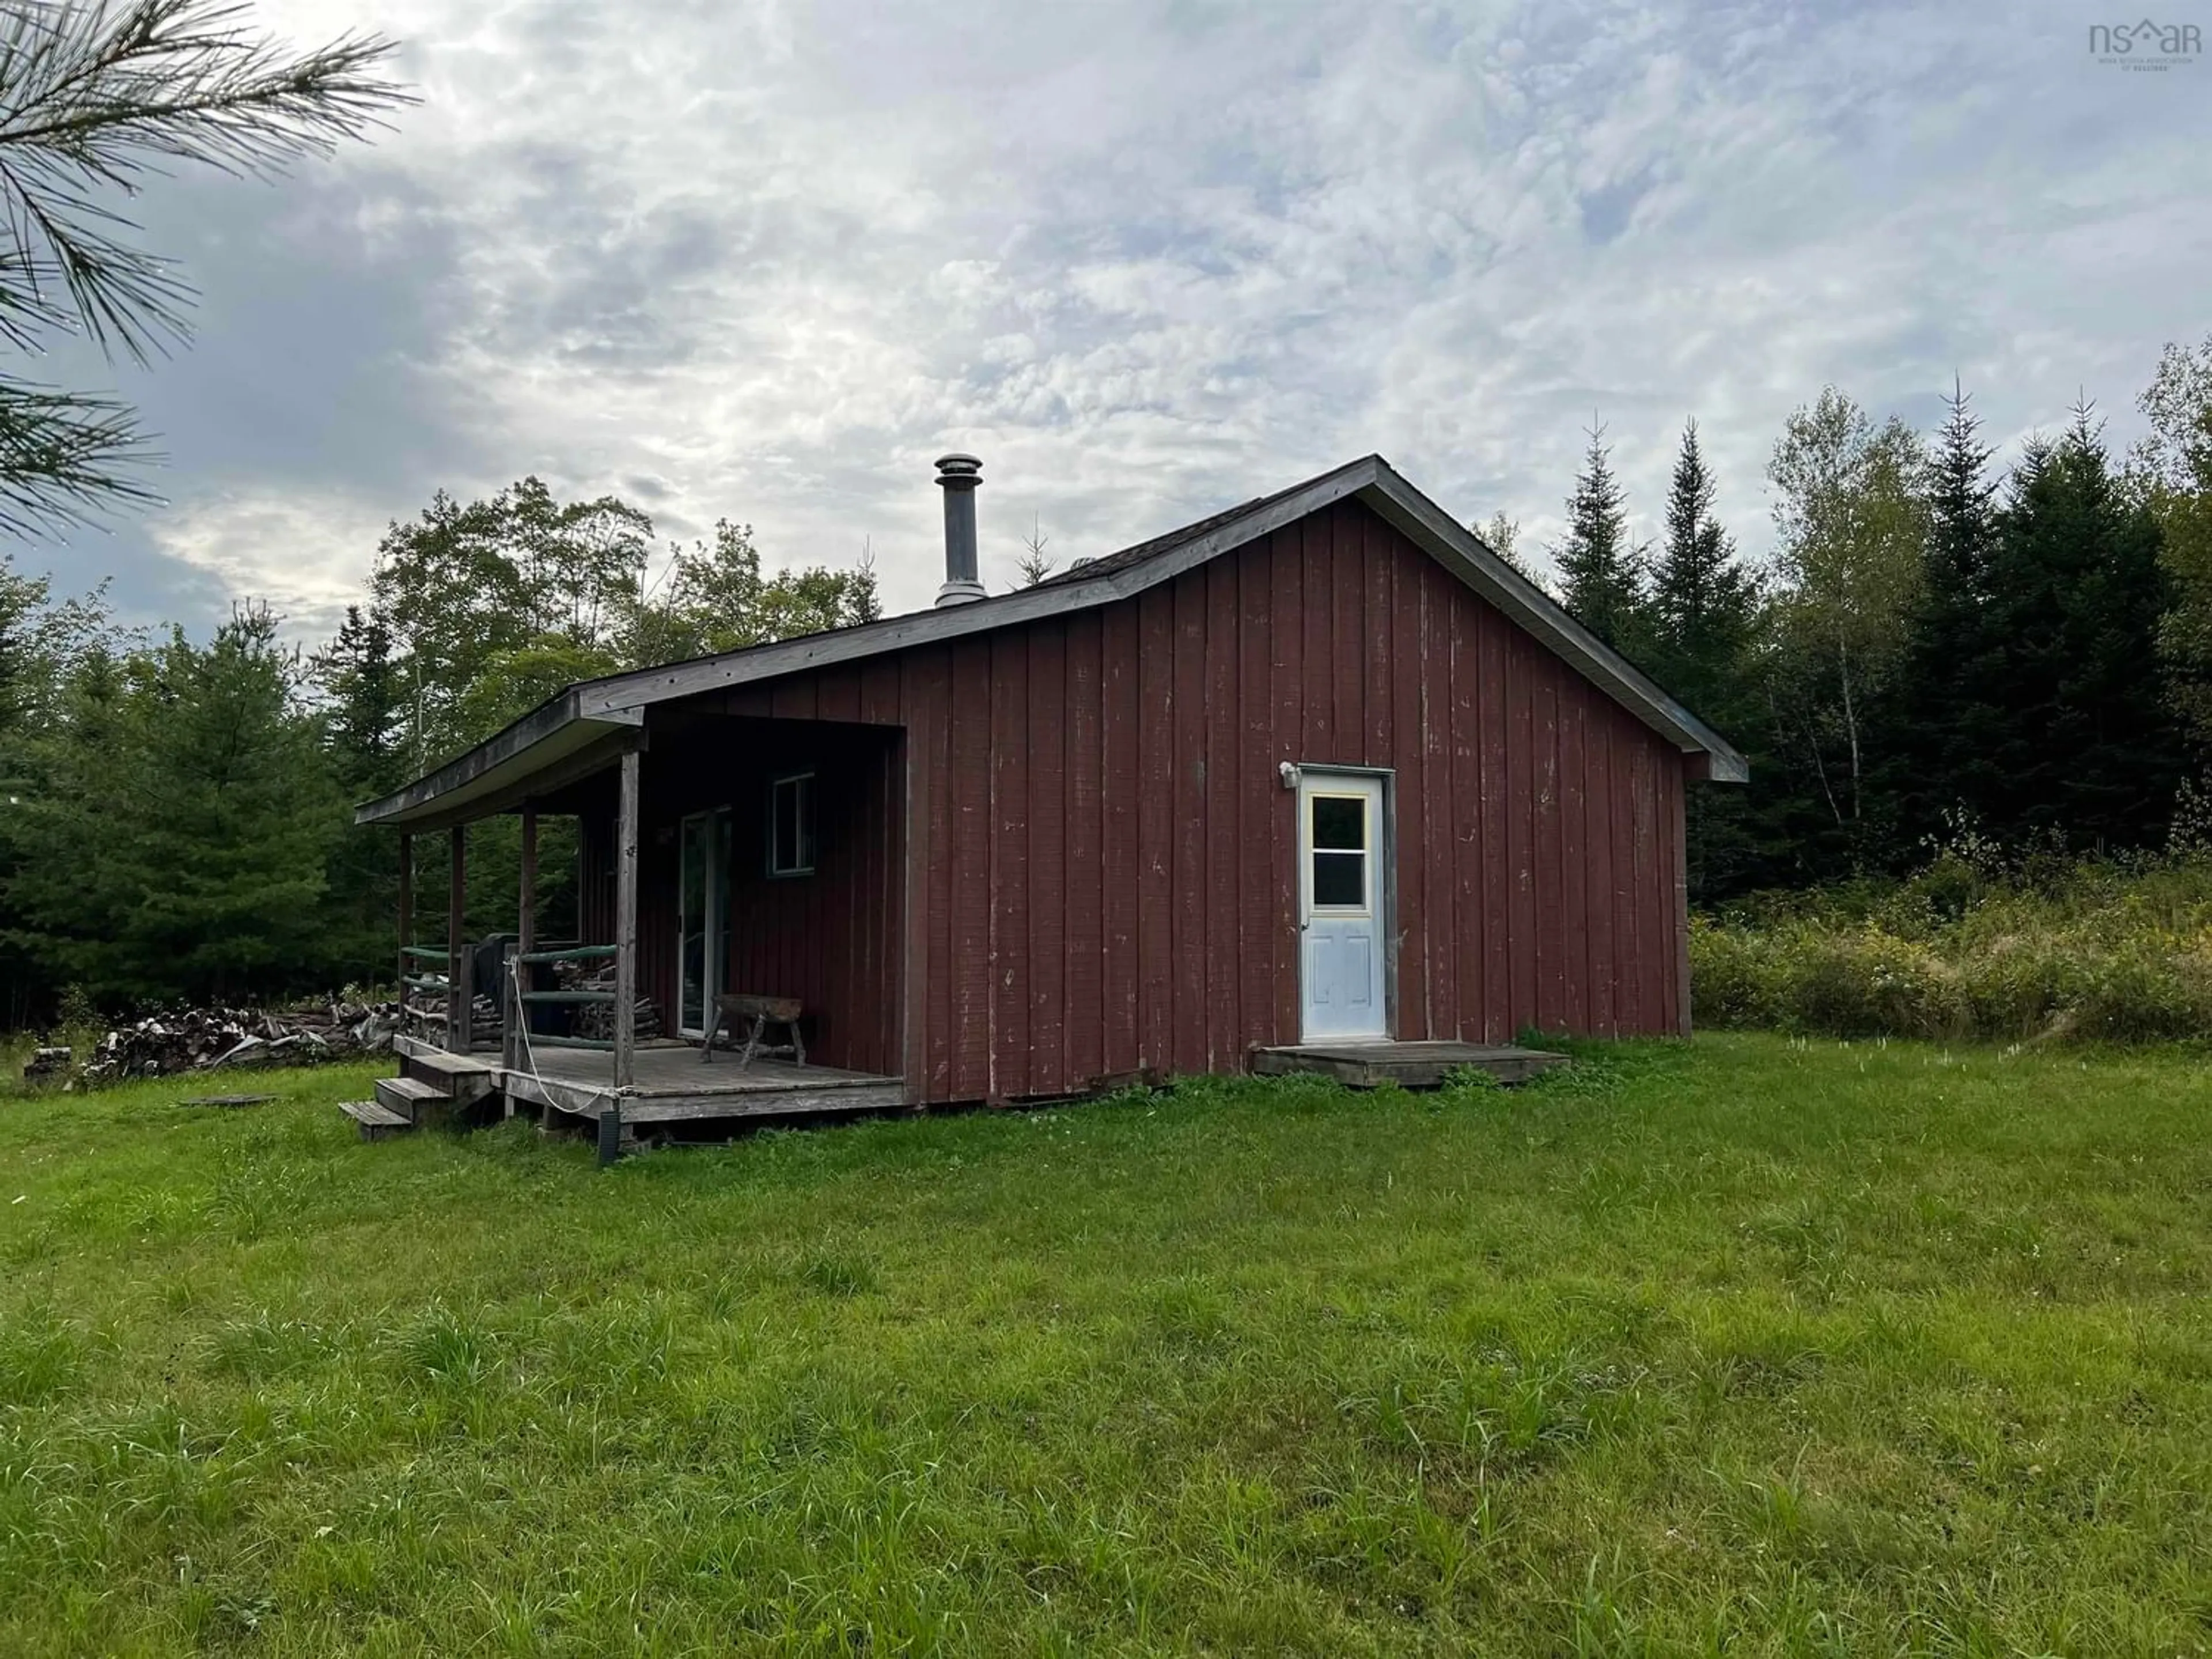 Shed for Lot 94 Old Glenmore Rd, Elmsvale Nova Scotia B0N 1X0